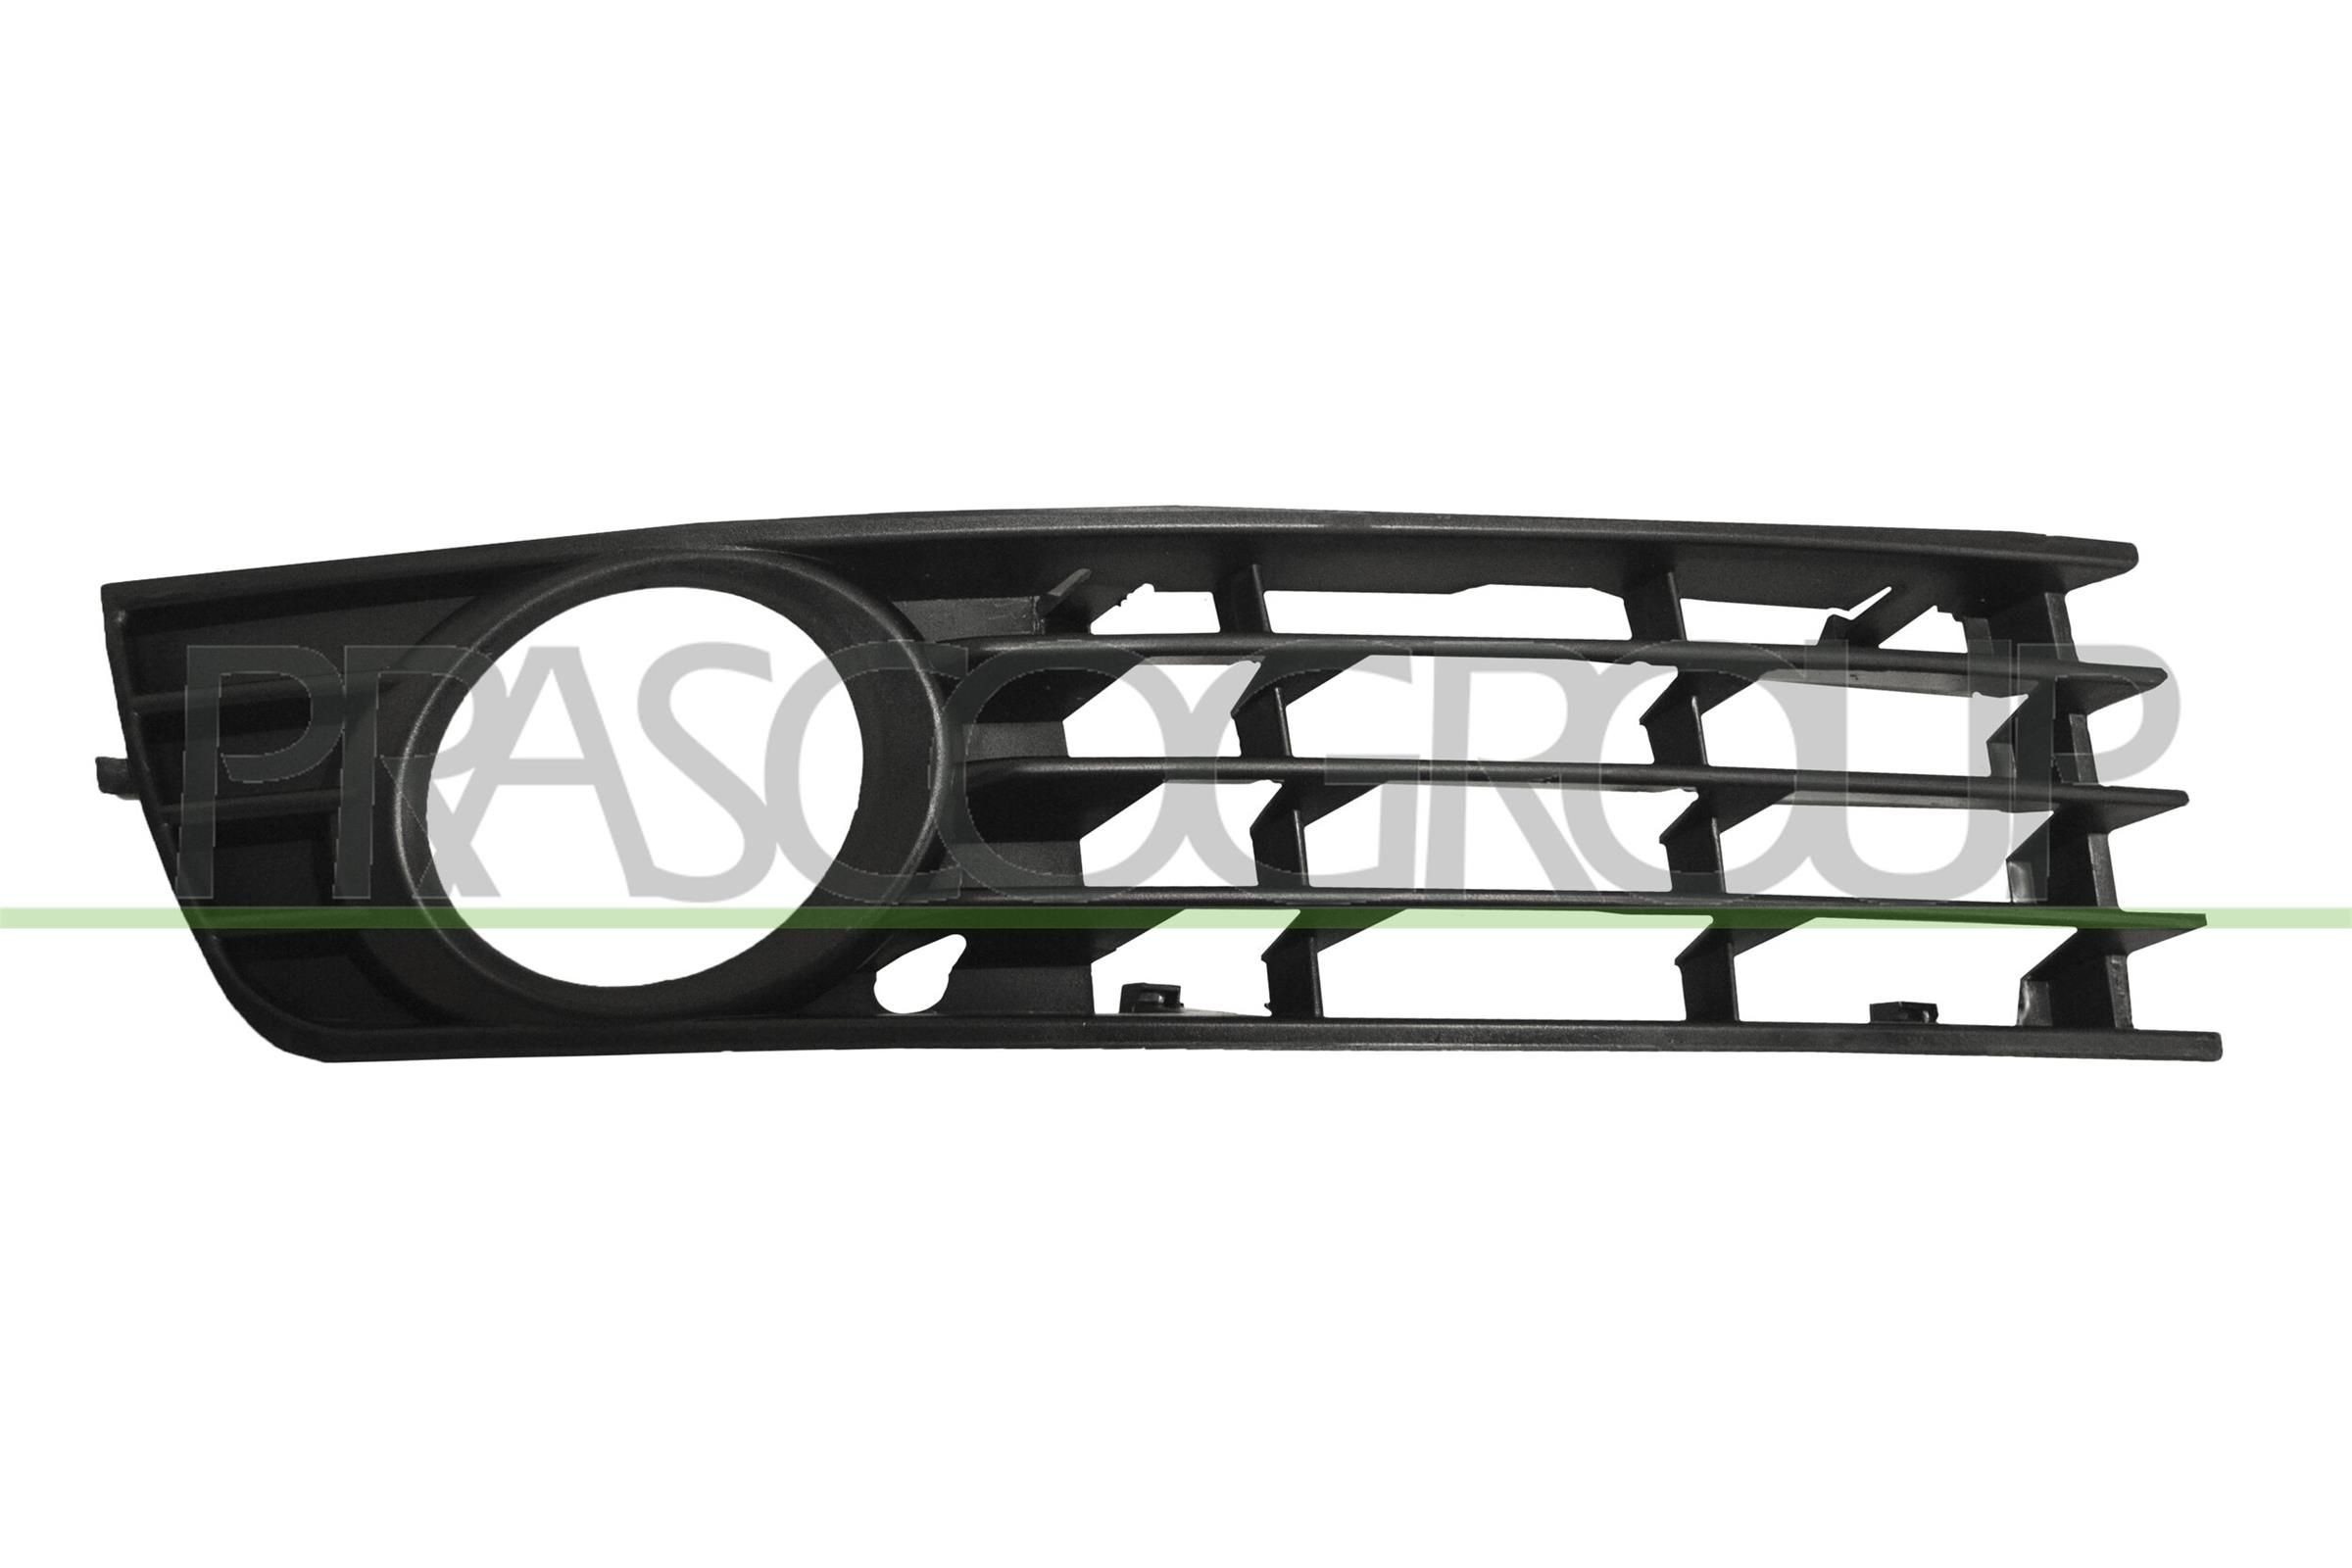 PRASCO AD0202133 Bumper grill with hole(s) for fog lights, Fitting Position: Right Front, Vehicle Equipment: for vehicles with automatic transmission